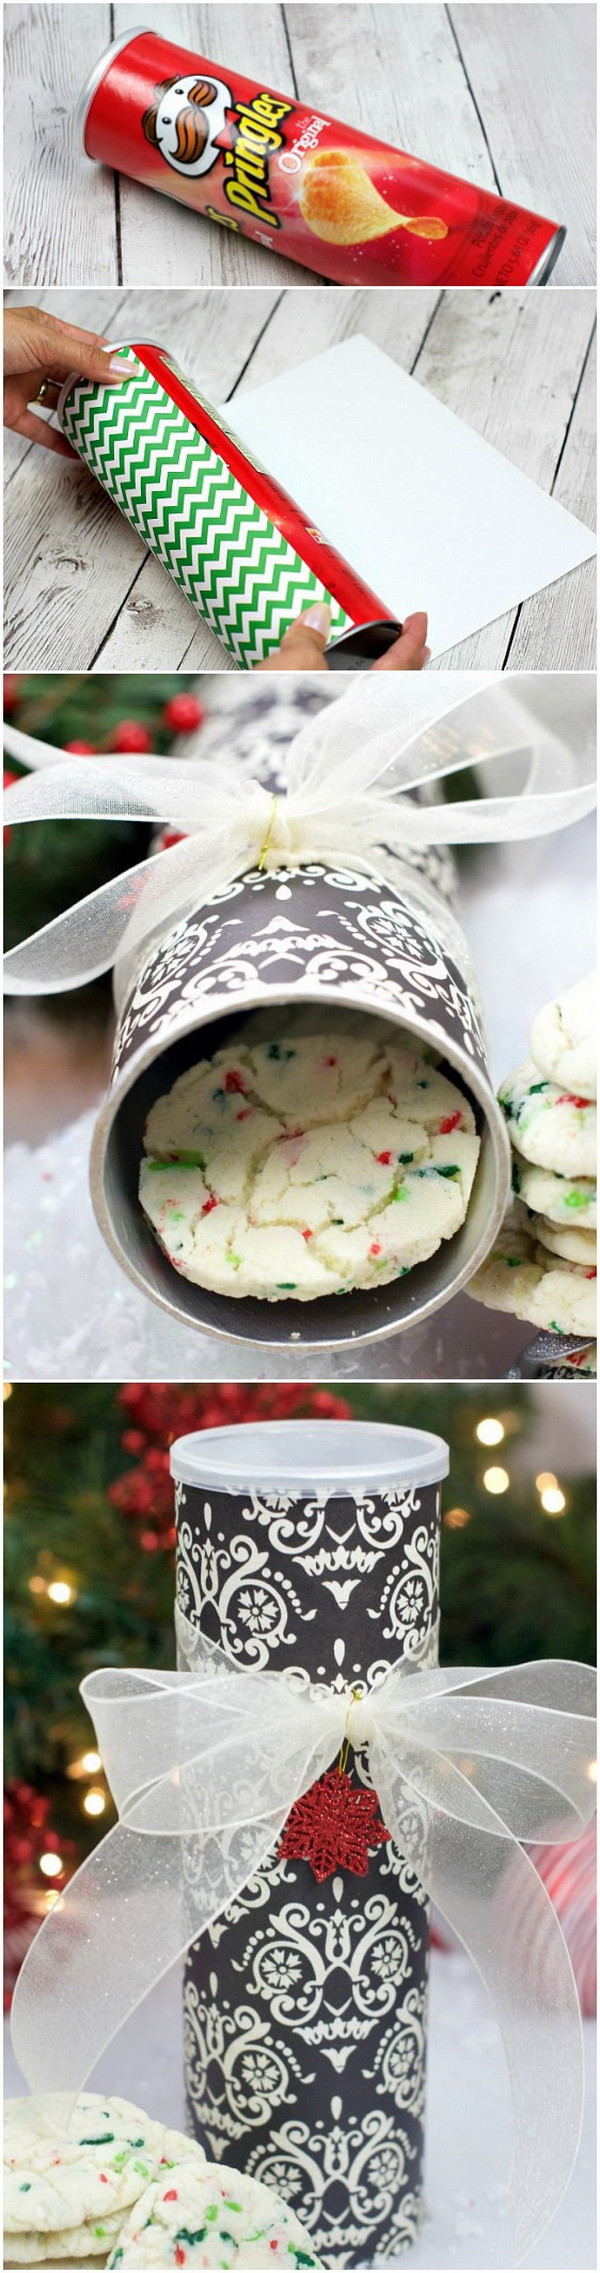 DIY Christmas Gifts For Friends
 30 Homemade Christmas Gifts Everyone will Love For